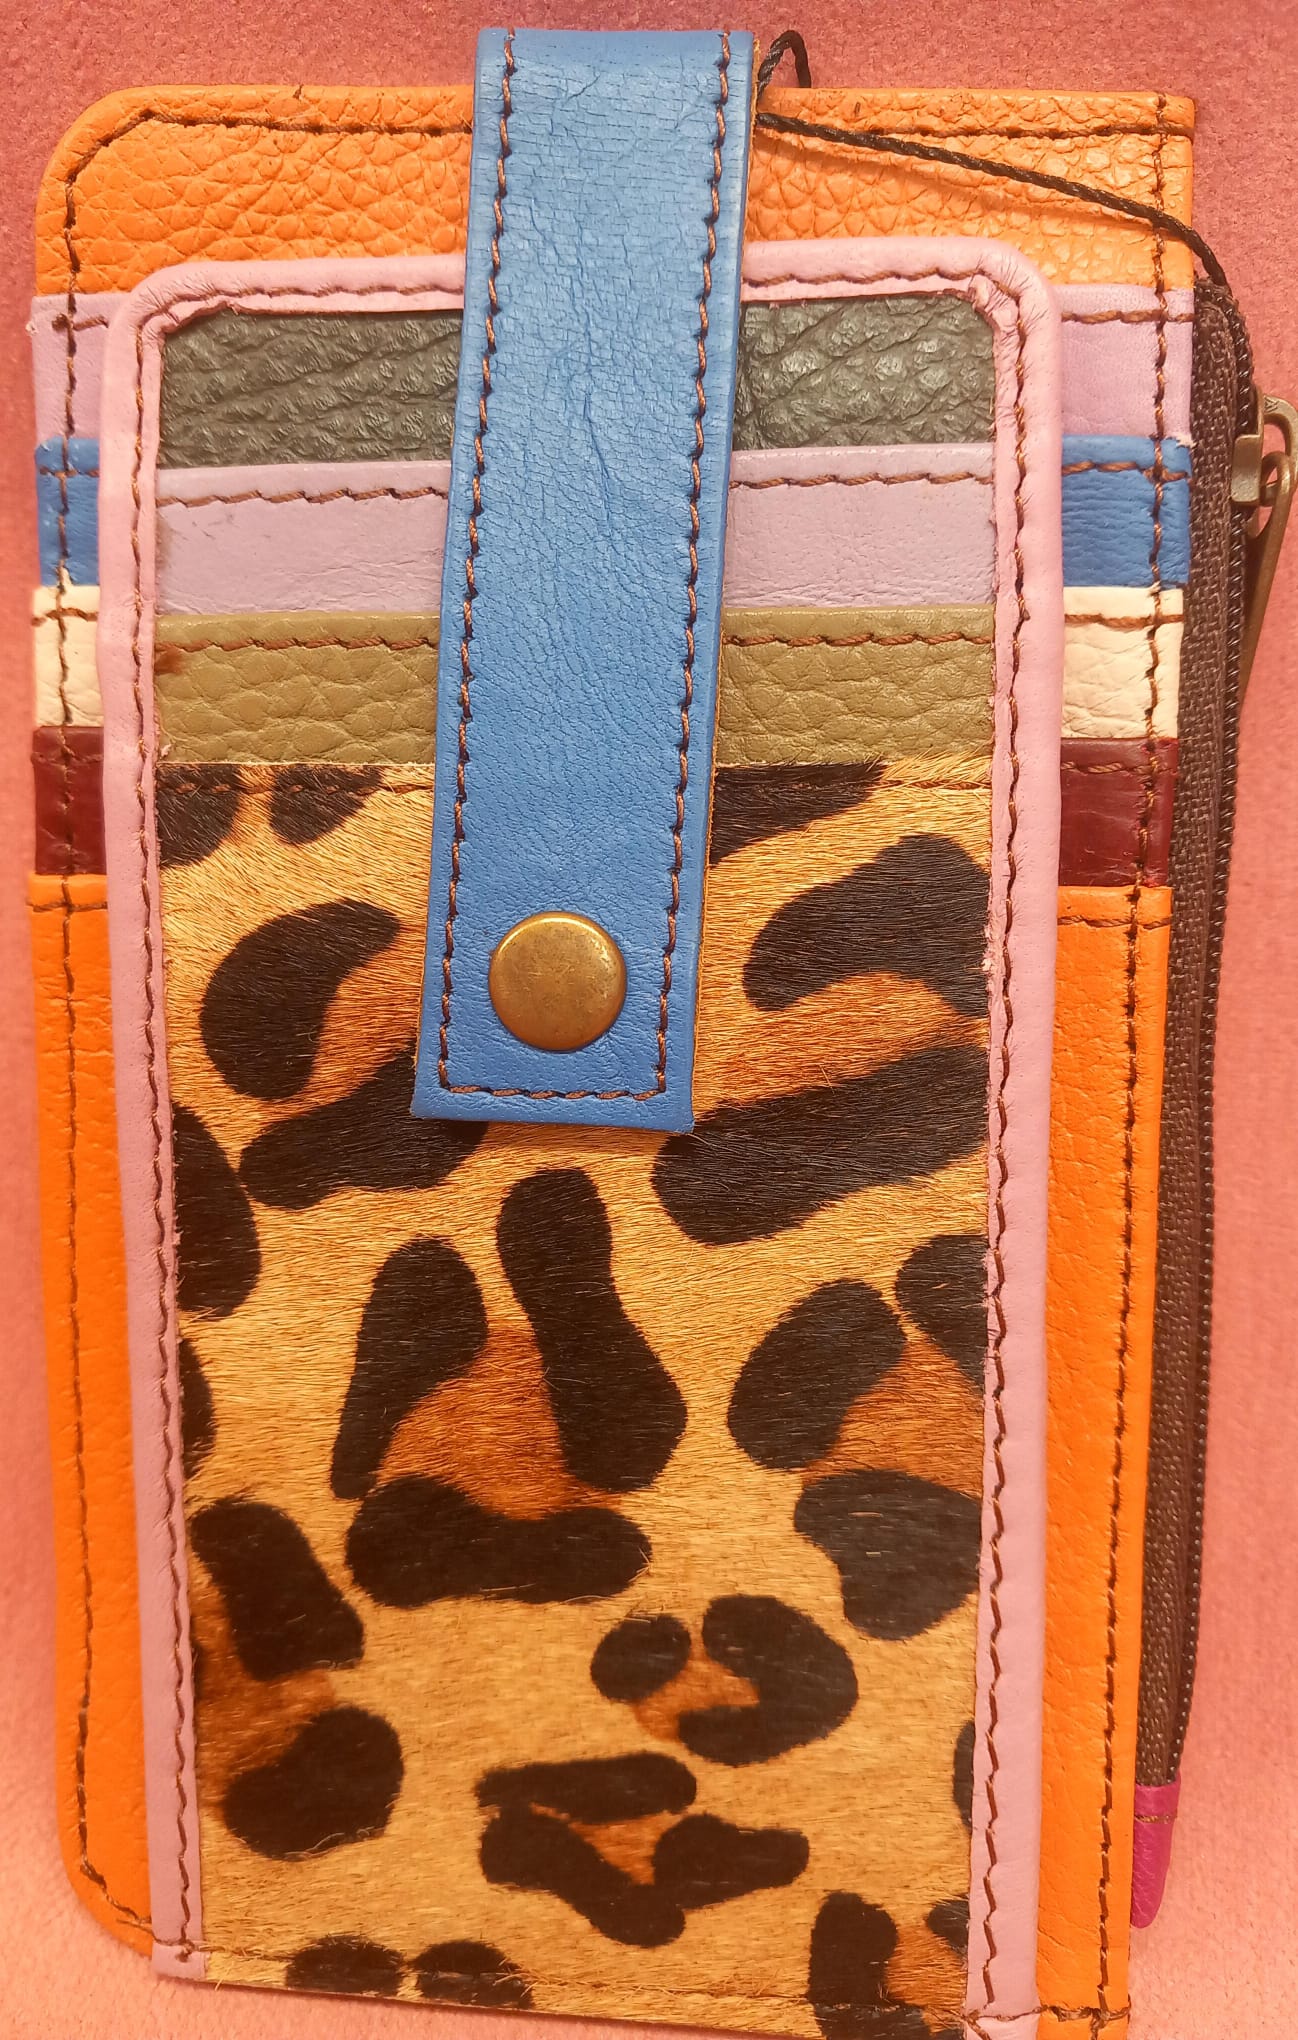 RFID card holder and MULTICOLOR flat purse made of genuine leather with a natural finish.